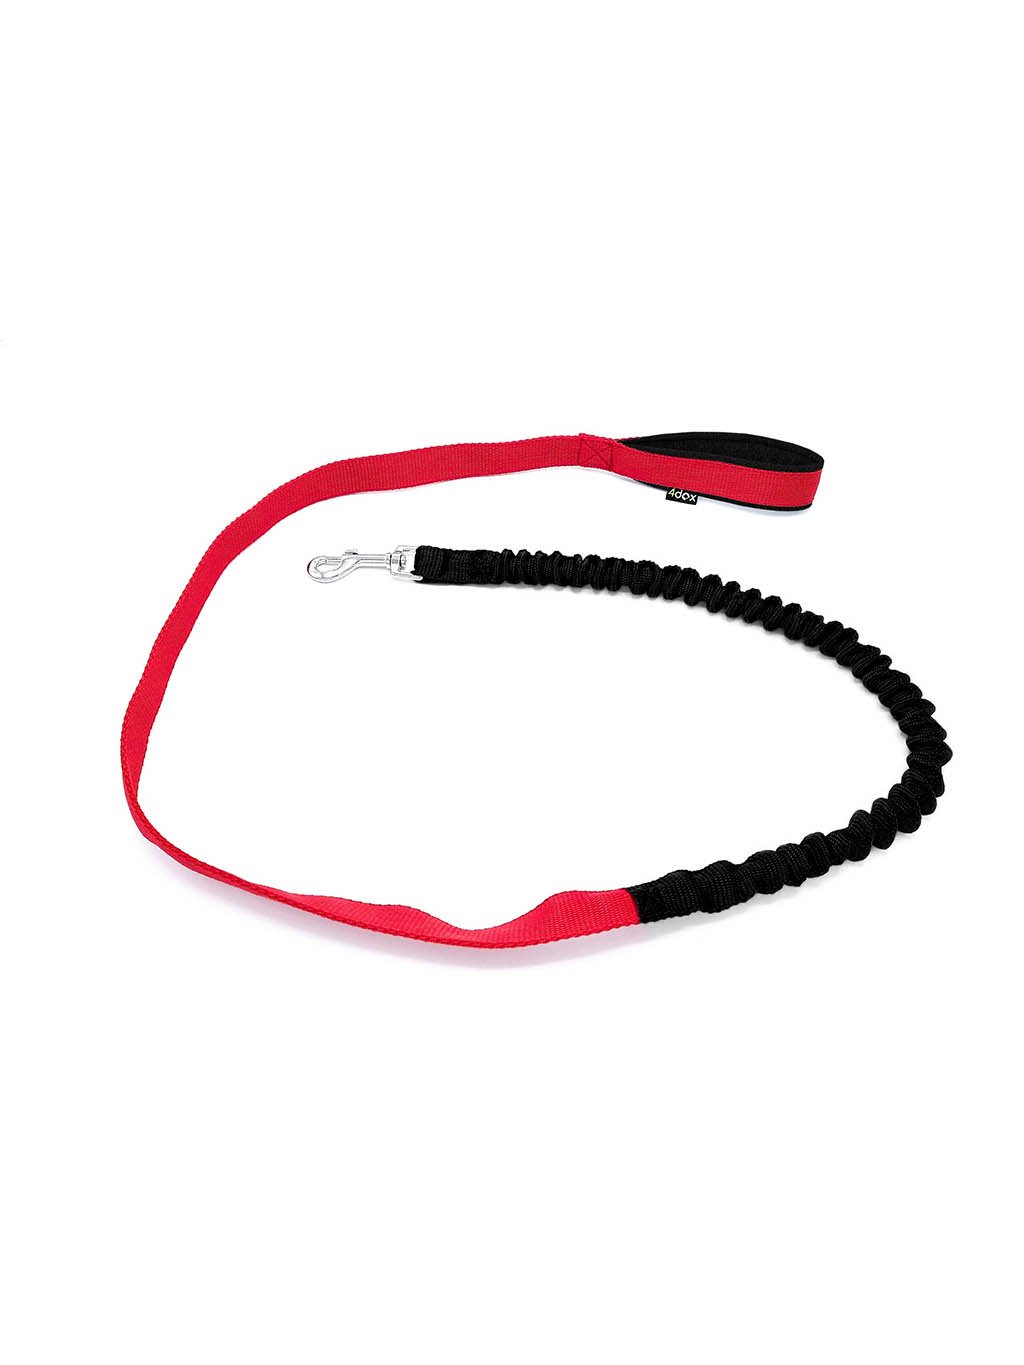 Guide with shock absorber - customized leash